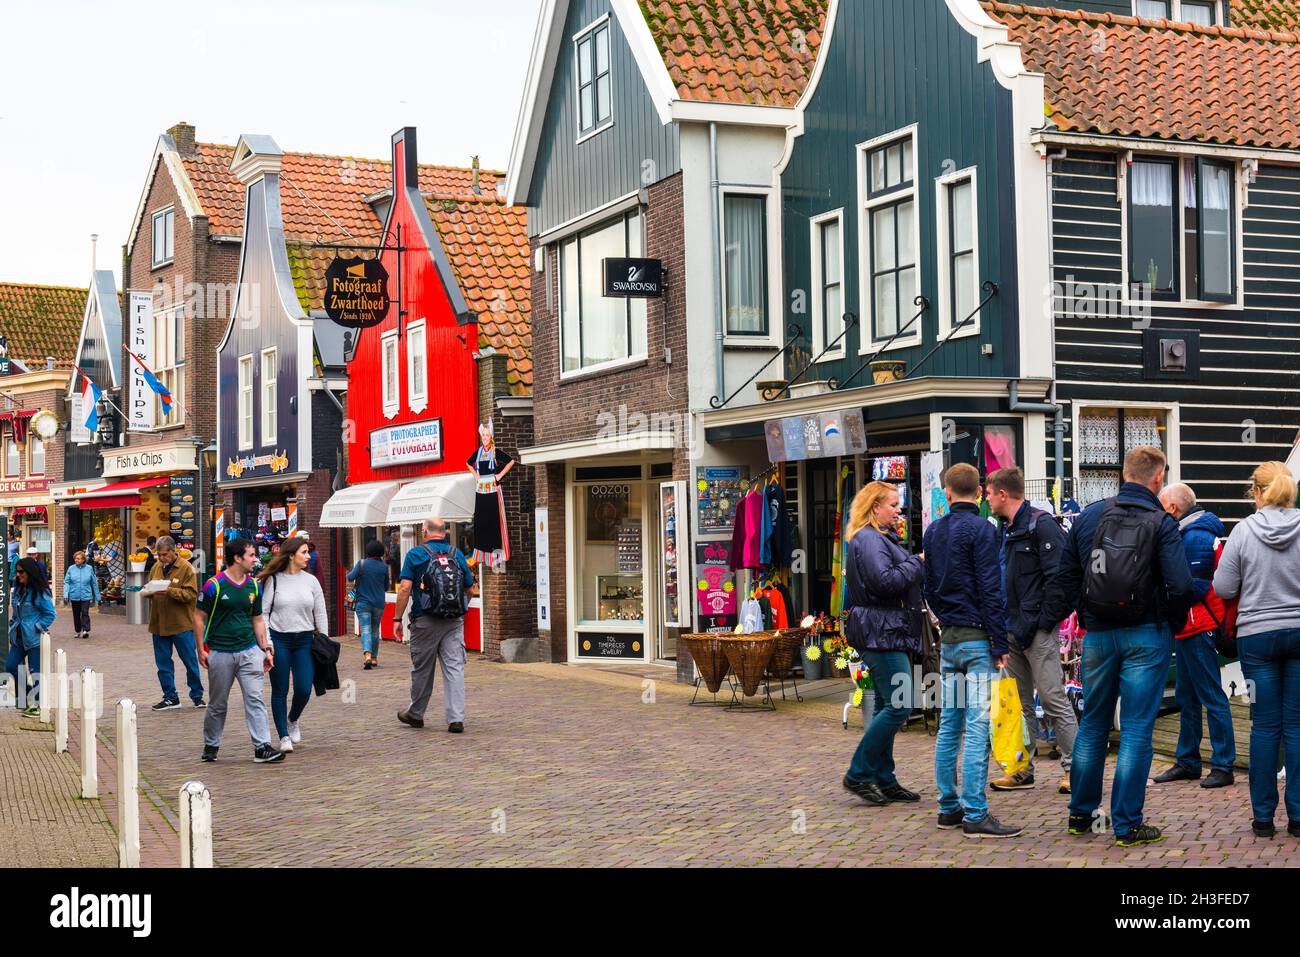 VOLENDAM, NETHERLANDS - SEPTEMBER 25, 2017: Volendam is a town in North Holland in the Netherlands. Colored houses of marine park in Volendam. North H Stock Photo